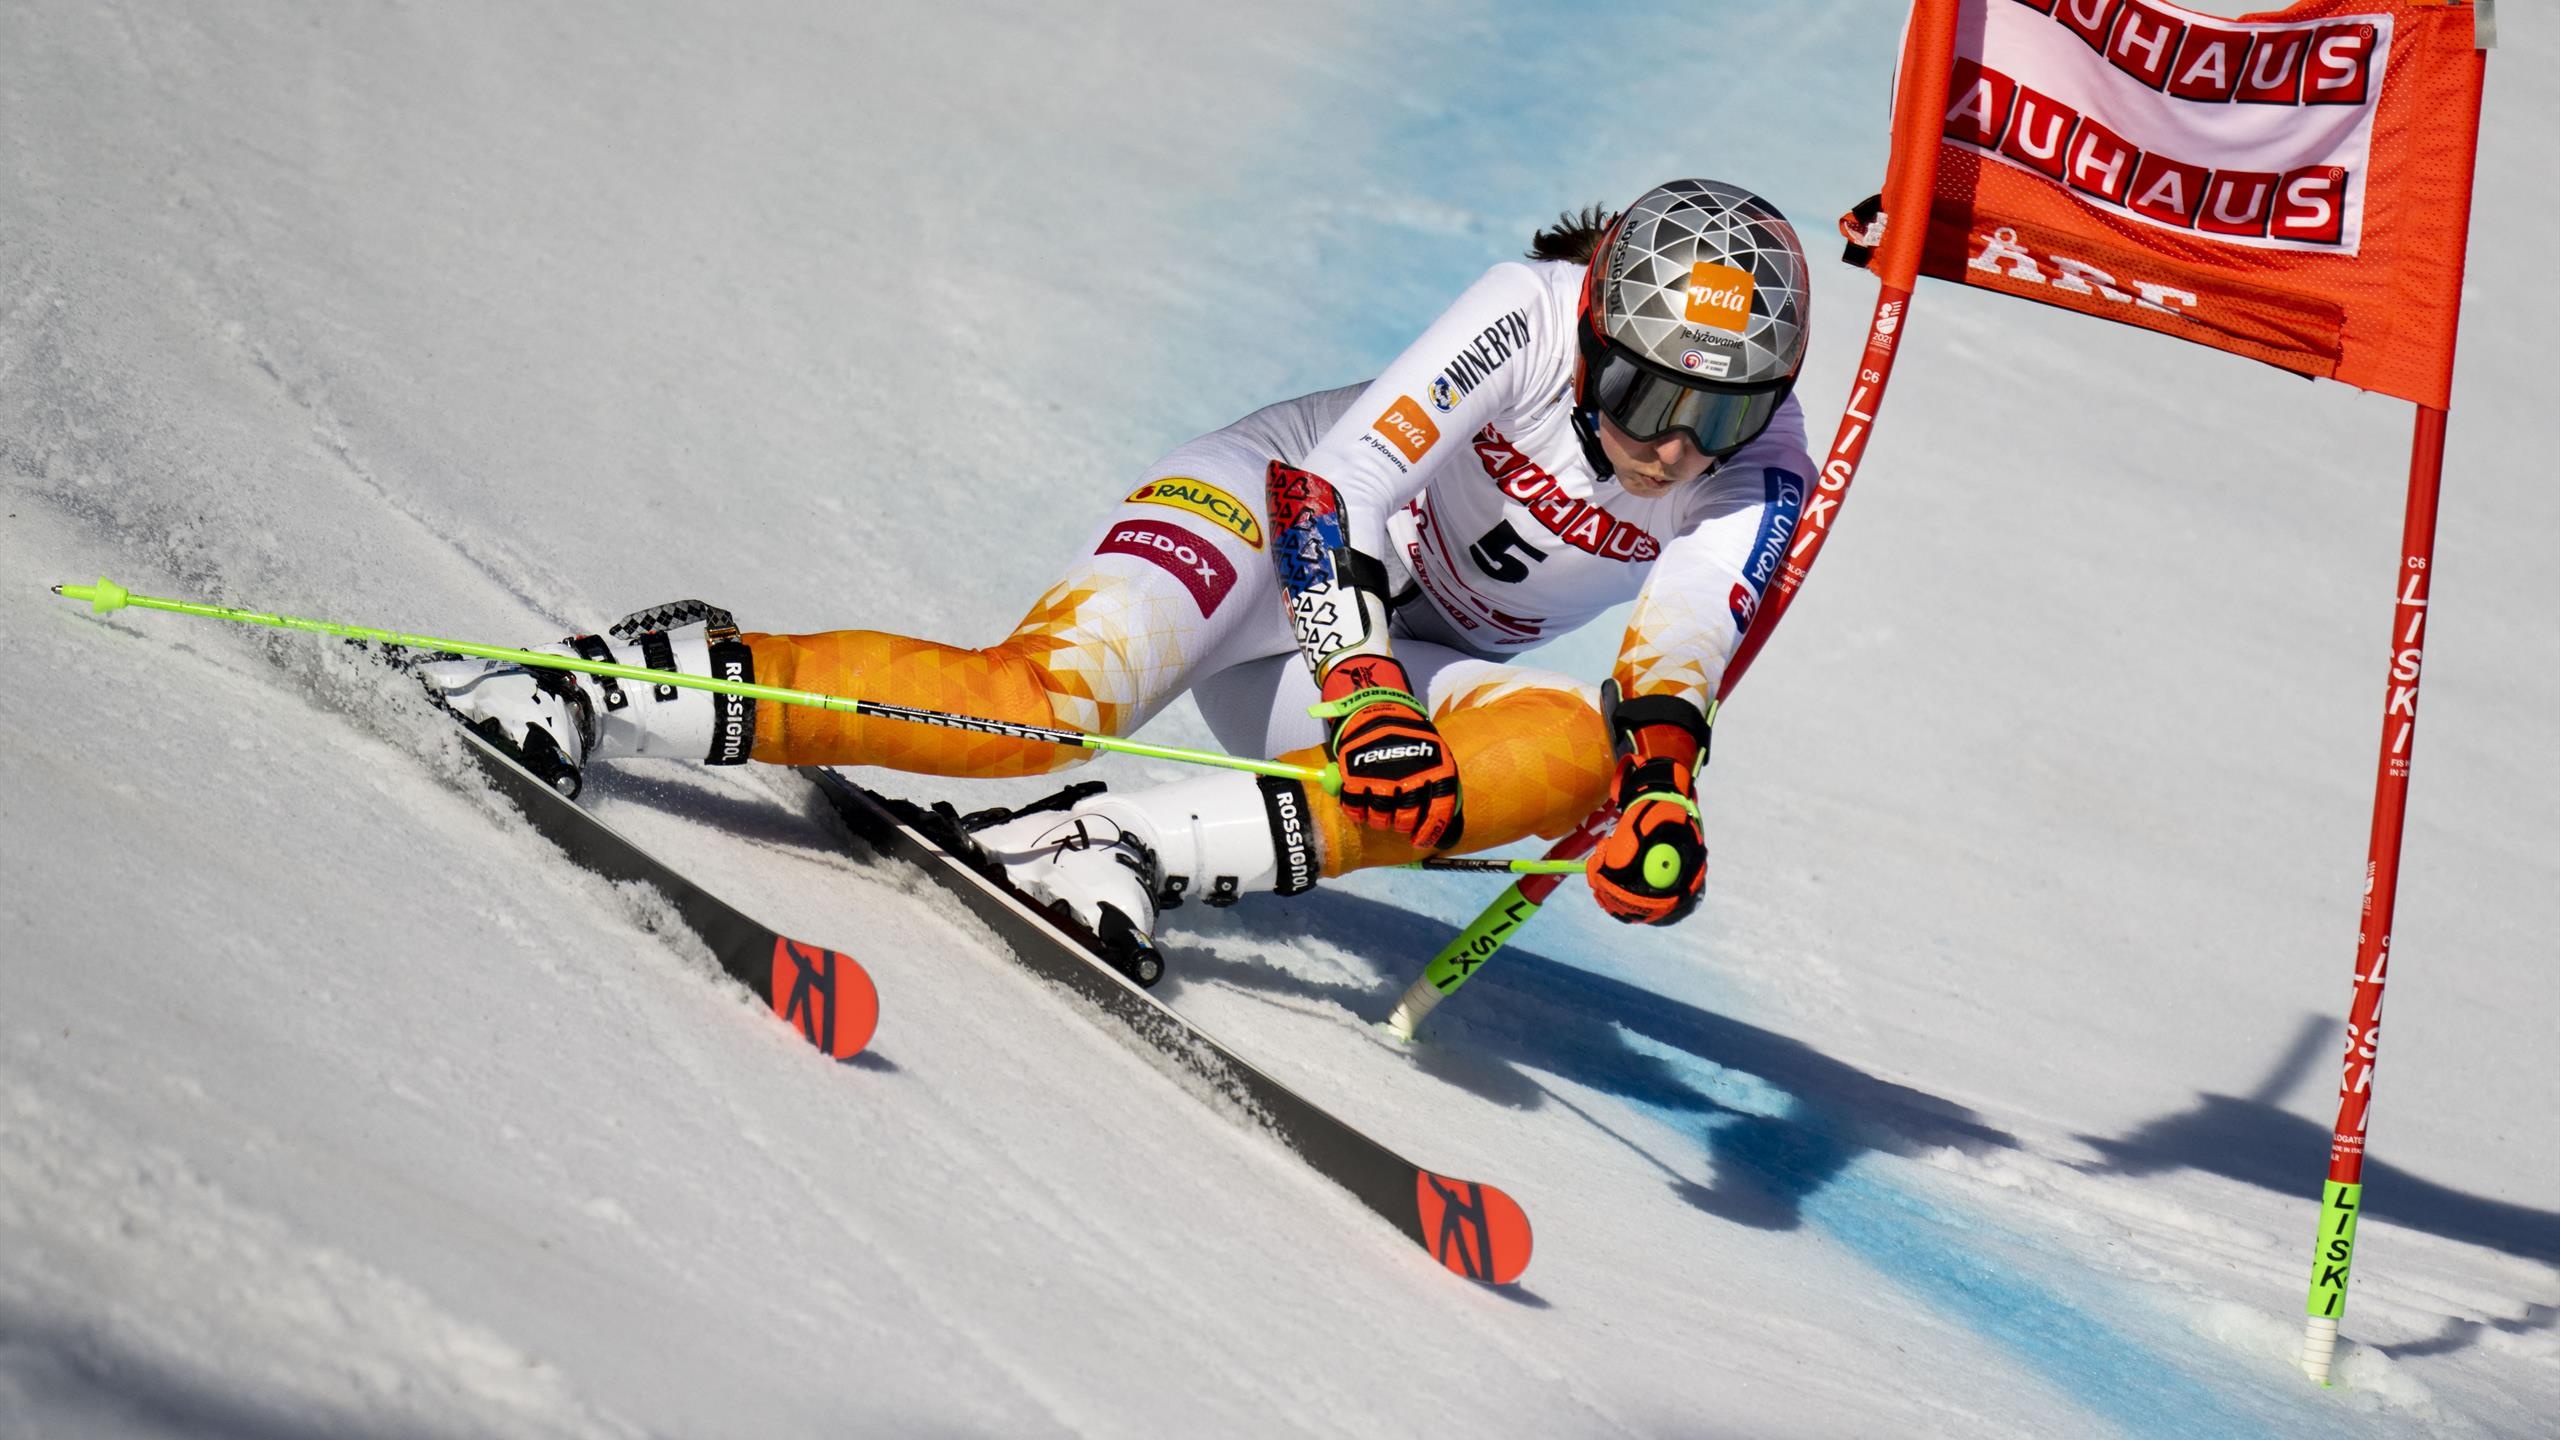 Latest alpine skiing news, Featured stories, Exciting videos, Eurosport coverage, 2560x1440 HD Desktop